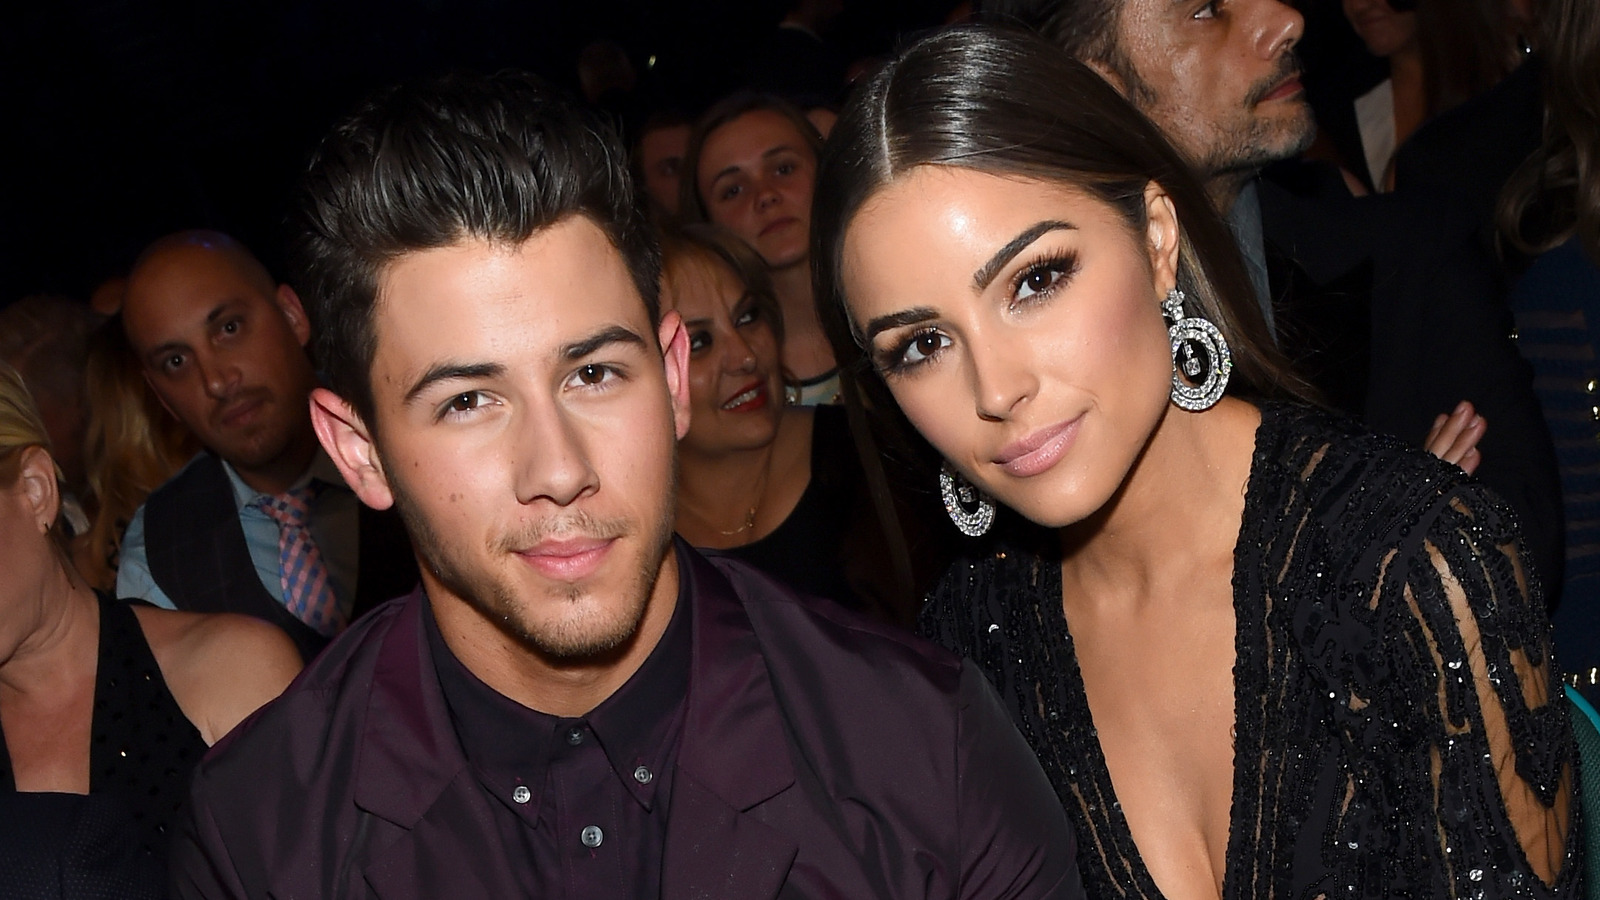 The Hit Song Nick Jonas Wrote About His Ex Olivia Culpo While They Were Still Together – The List